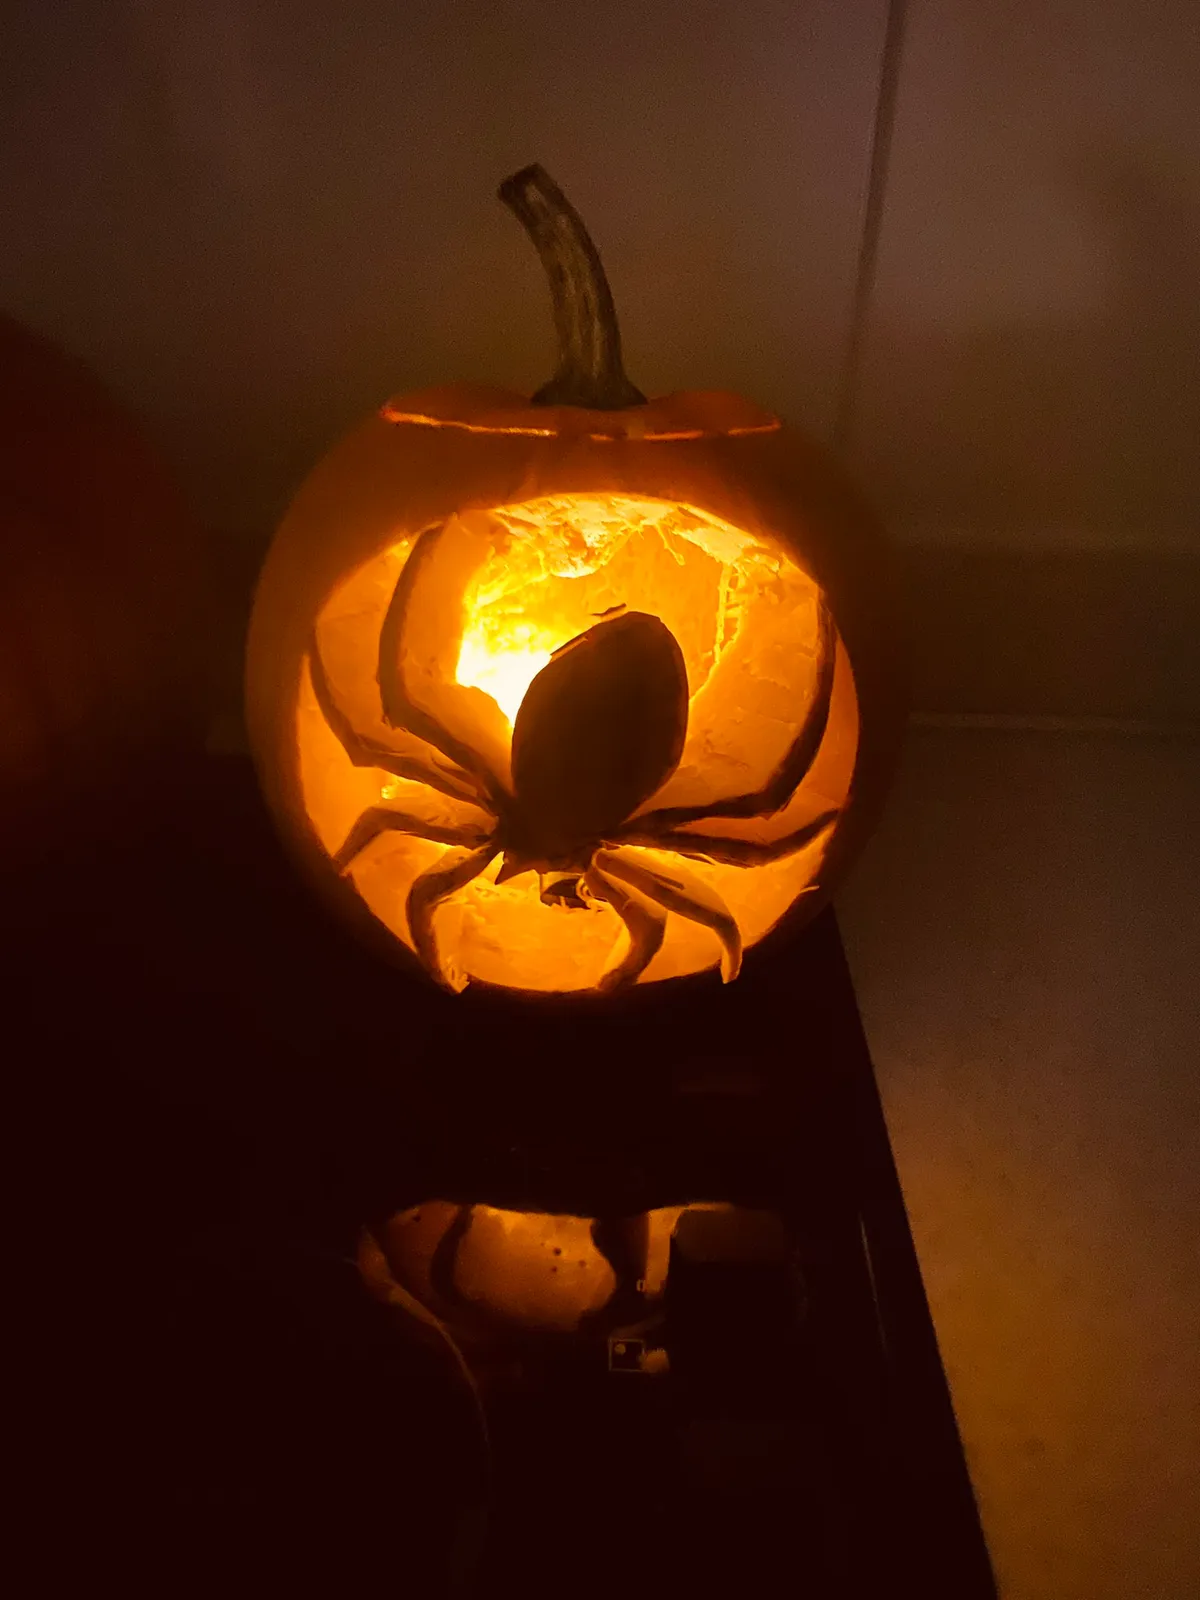 A pumpkin in darkness, lit up from within to show the spider carving.